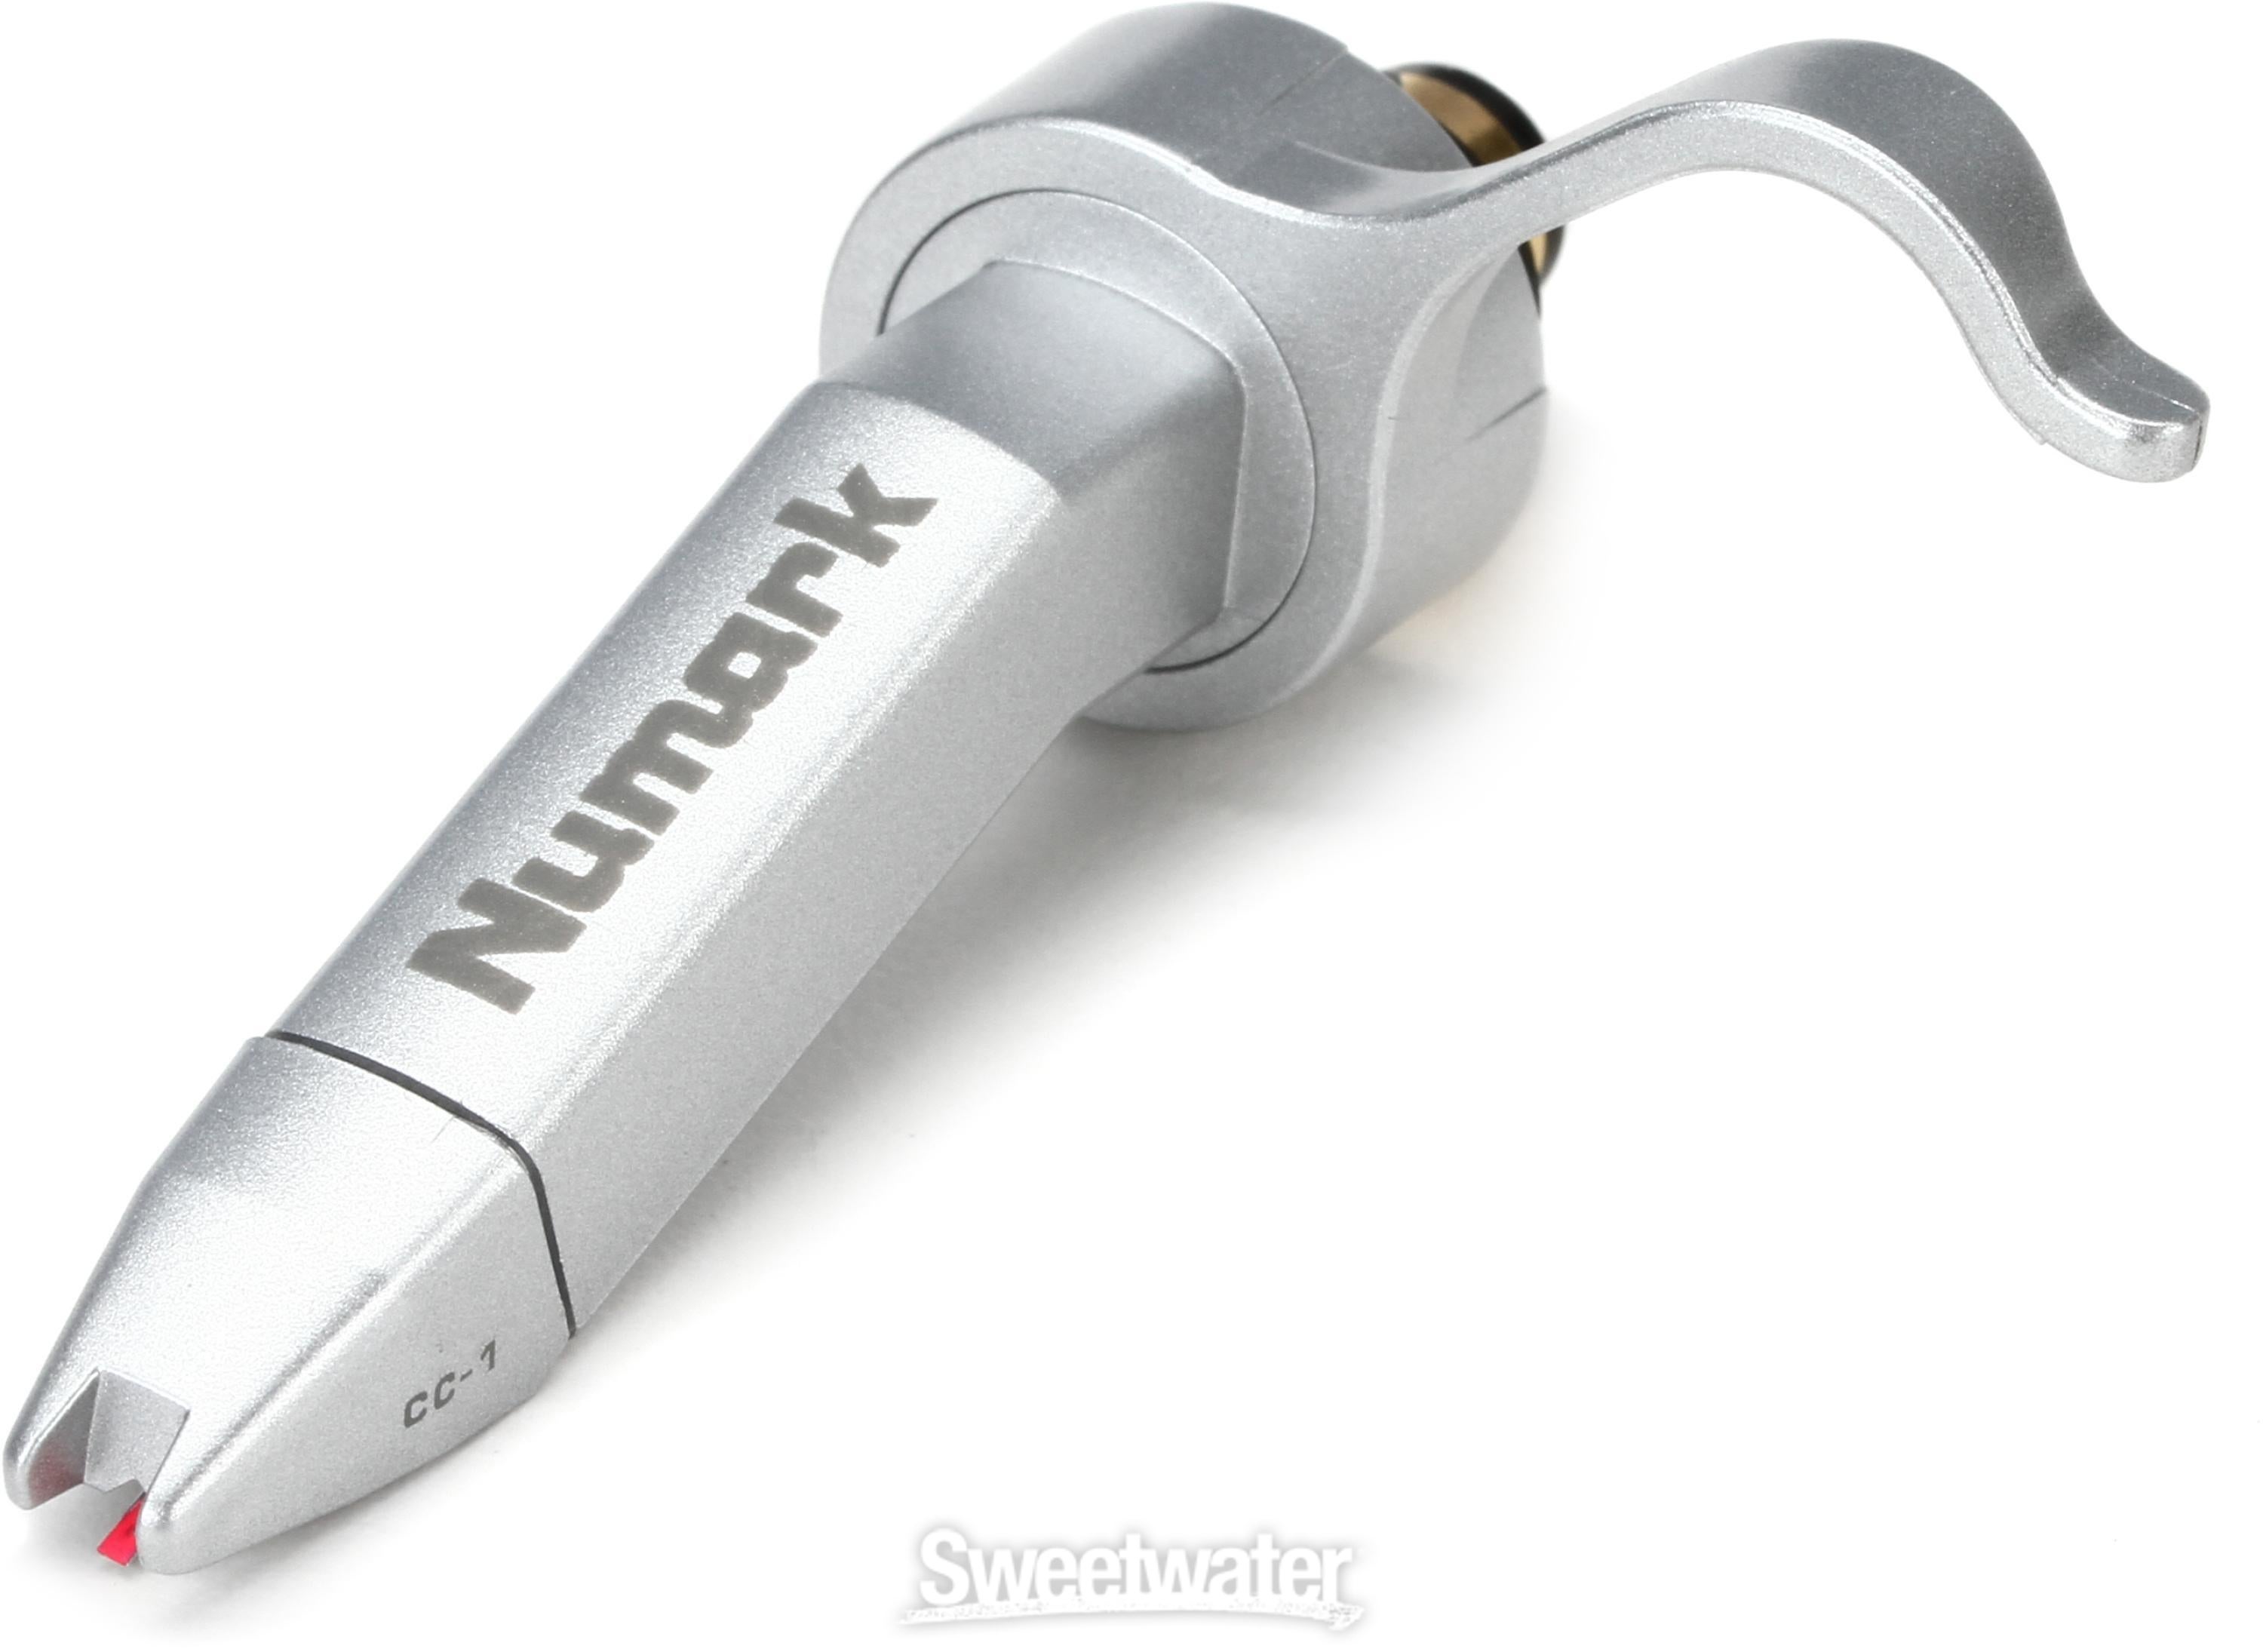 Numark CC-1 Turntable Cartridge and Stylus | Sweetwater